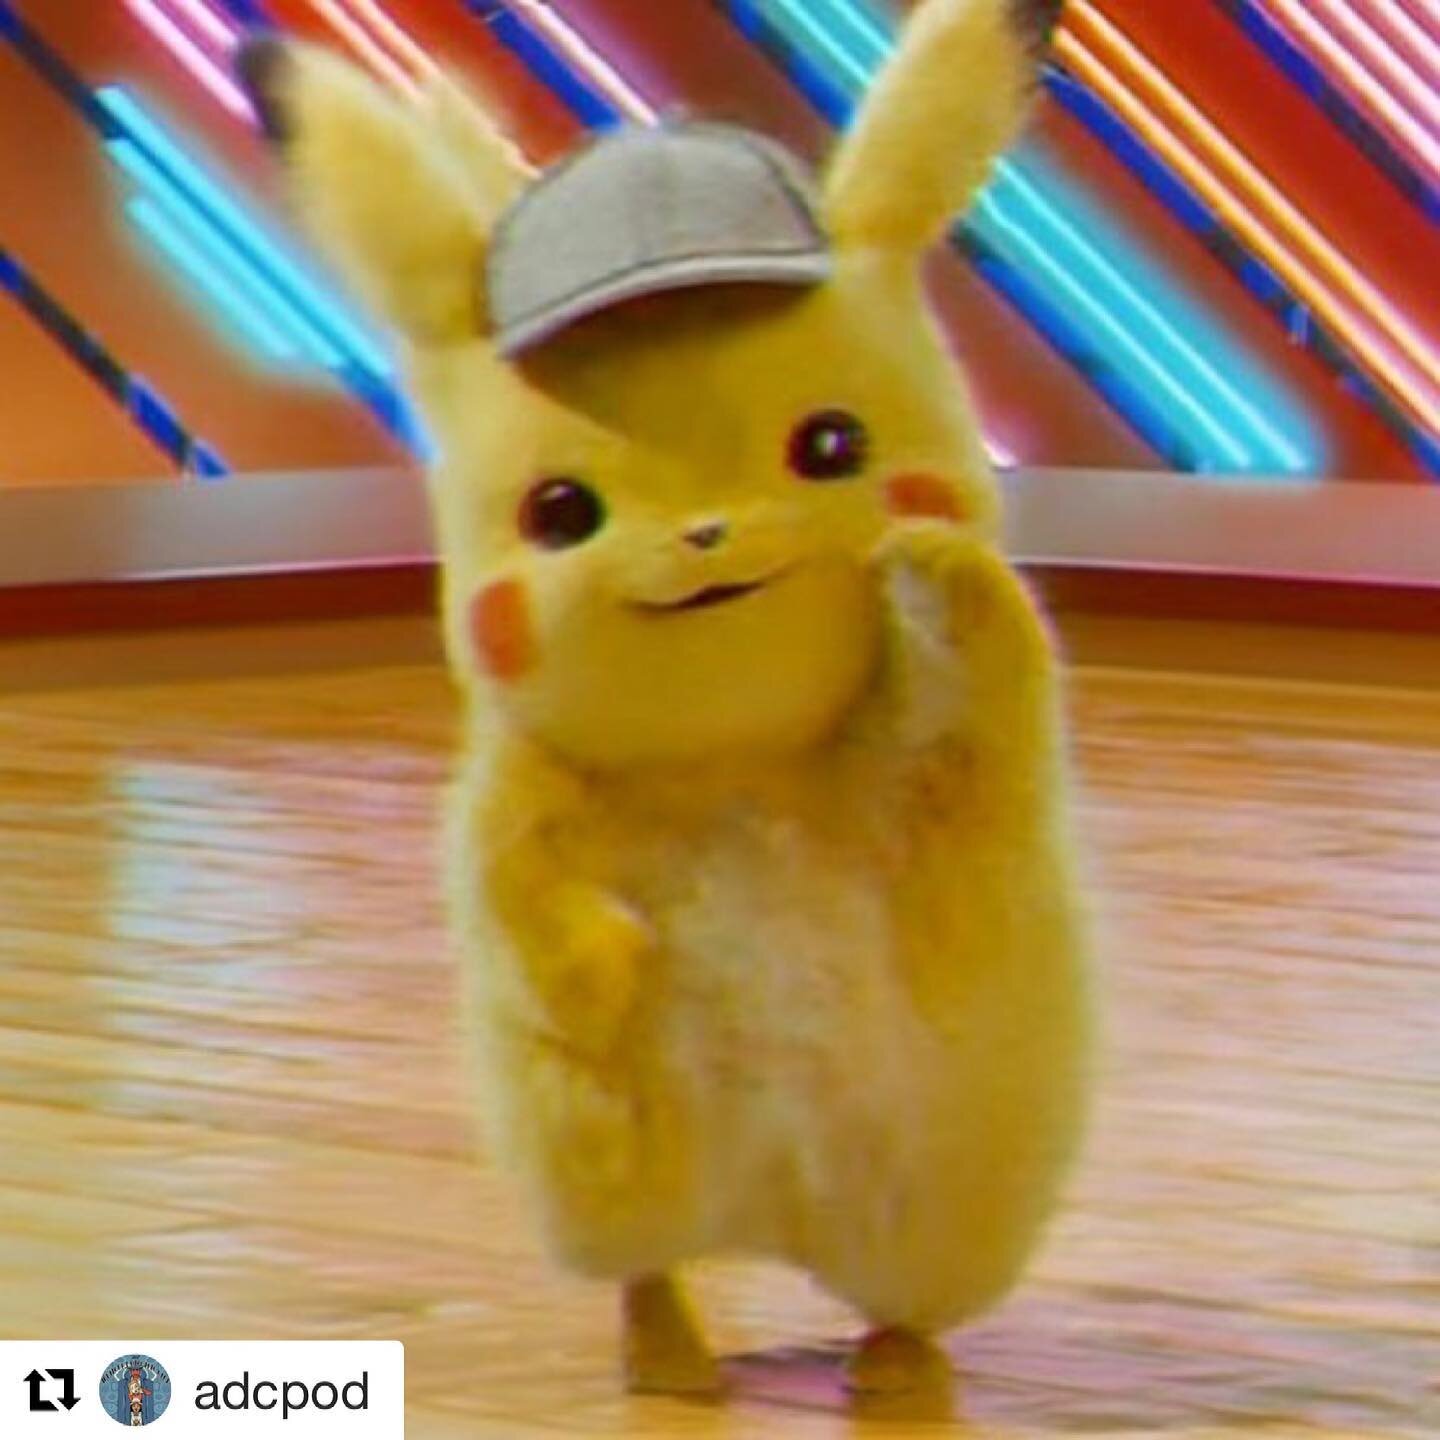 This past weekend marked the 25th anniversary of Pokemon! So check out this #Repost from @adcpod
・・・
Happy #Pokemon25thAnniversary! To celebrate, why not have a listen to our #DetectvePikachu episode from May 13th, 2019? Gotta catch &lsquo;em all...m